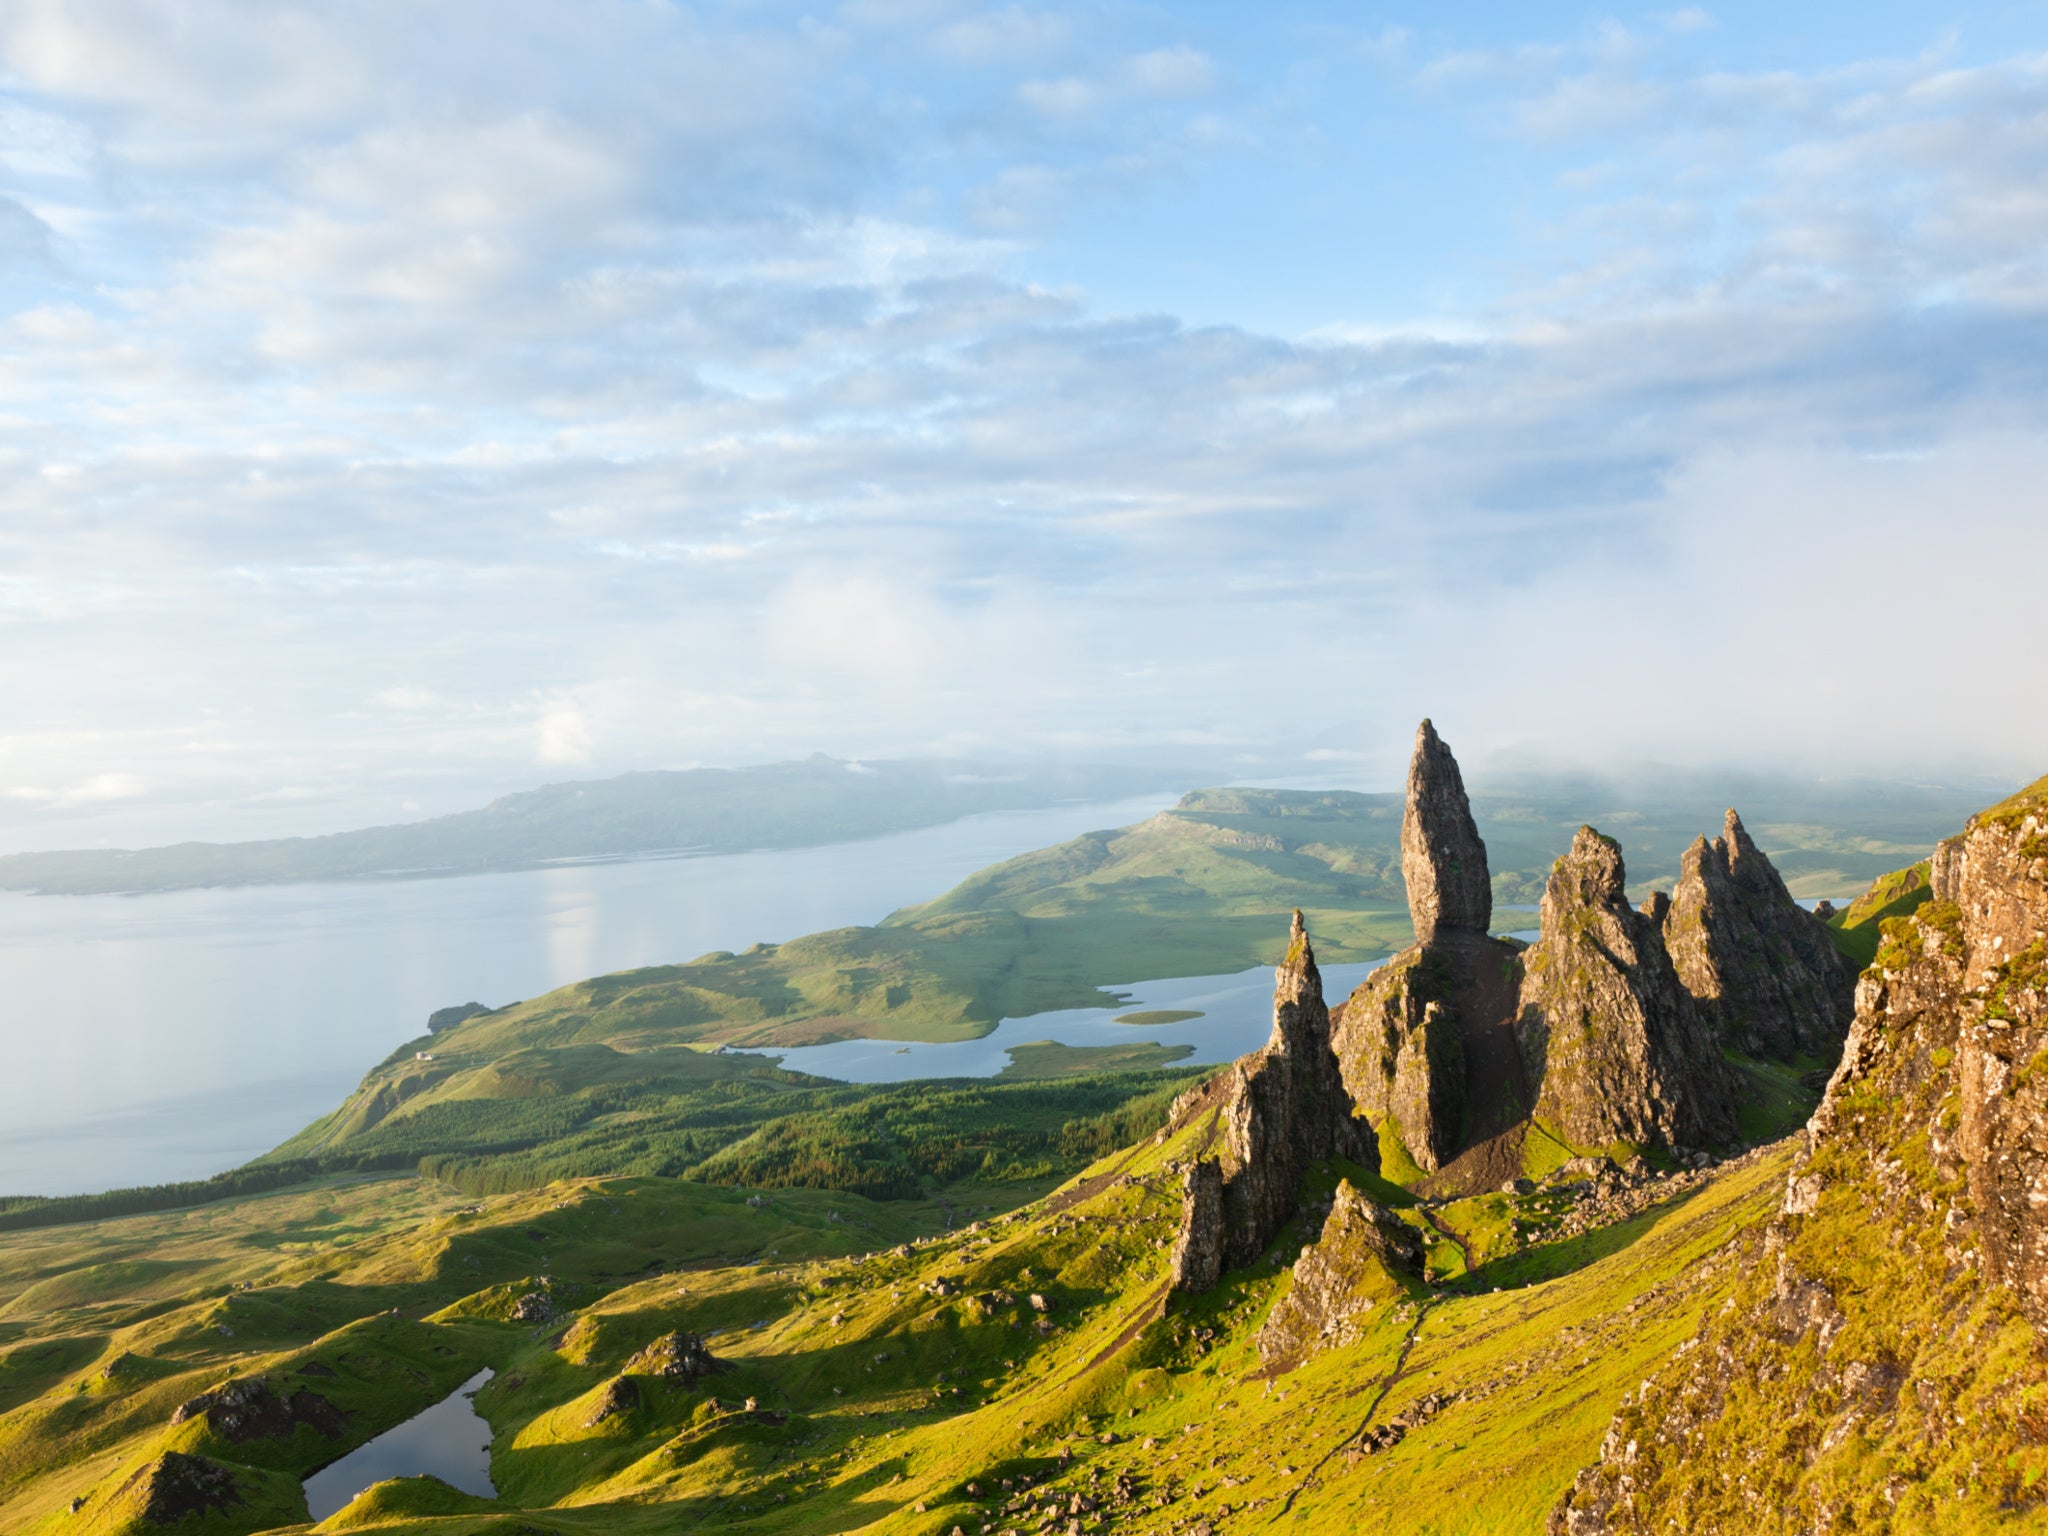 The spectacular Isle of Skye scenery can be explored on a budget